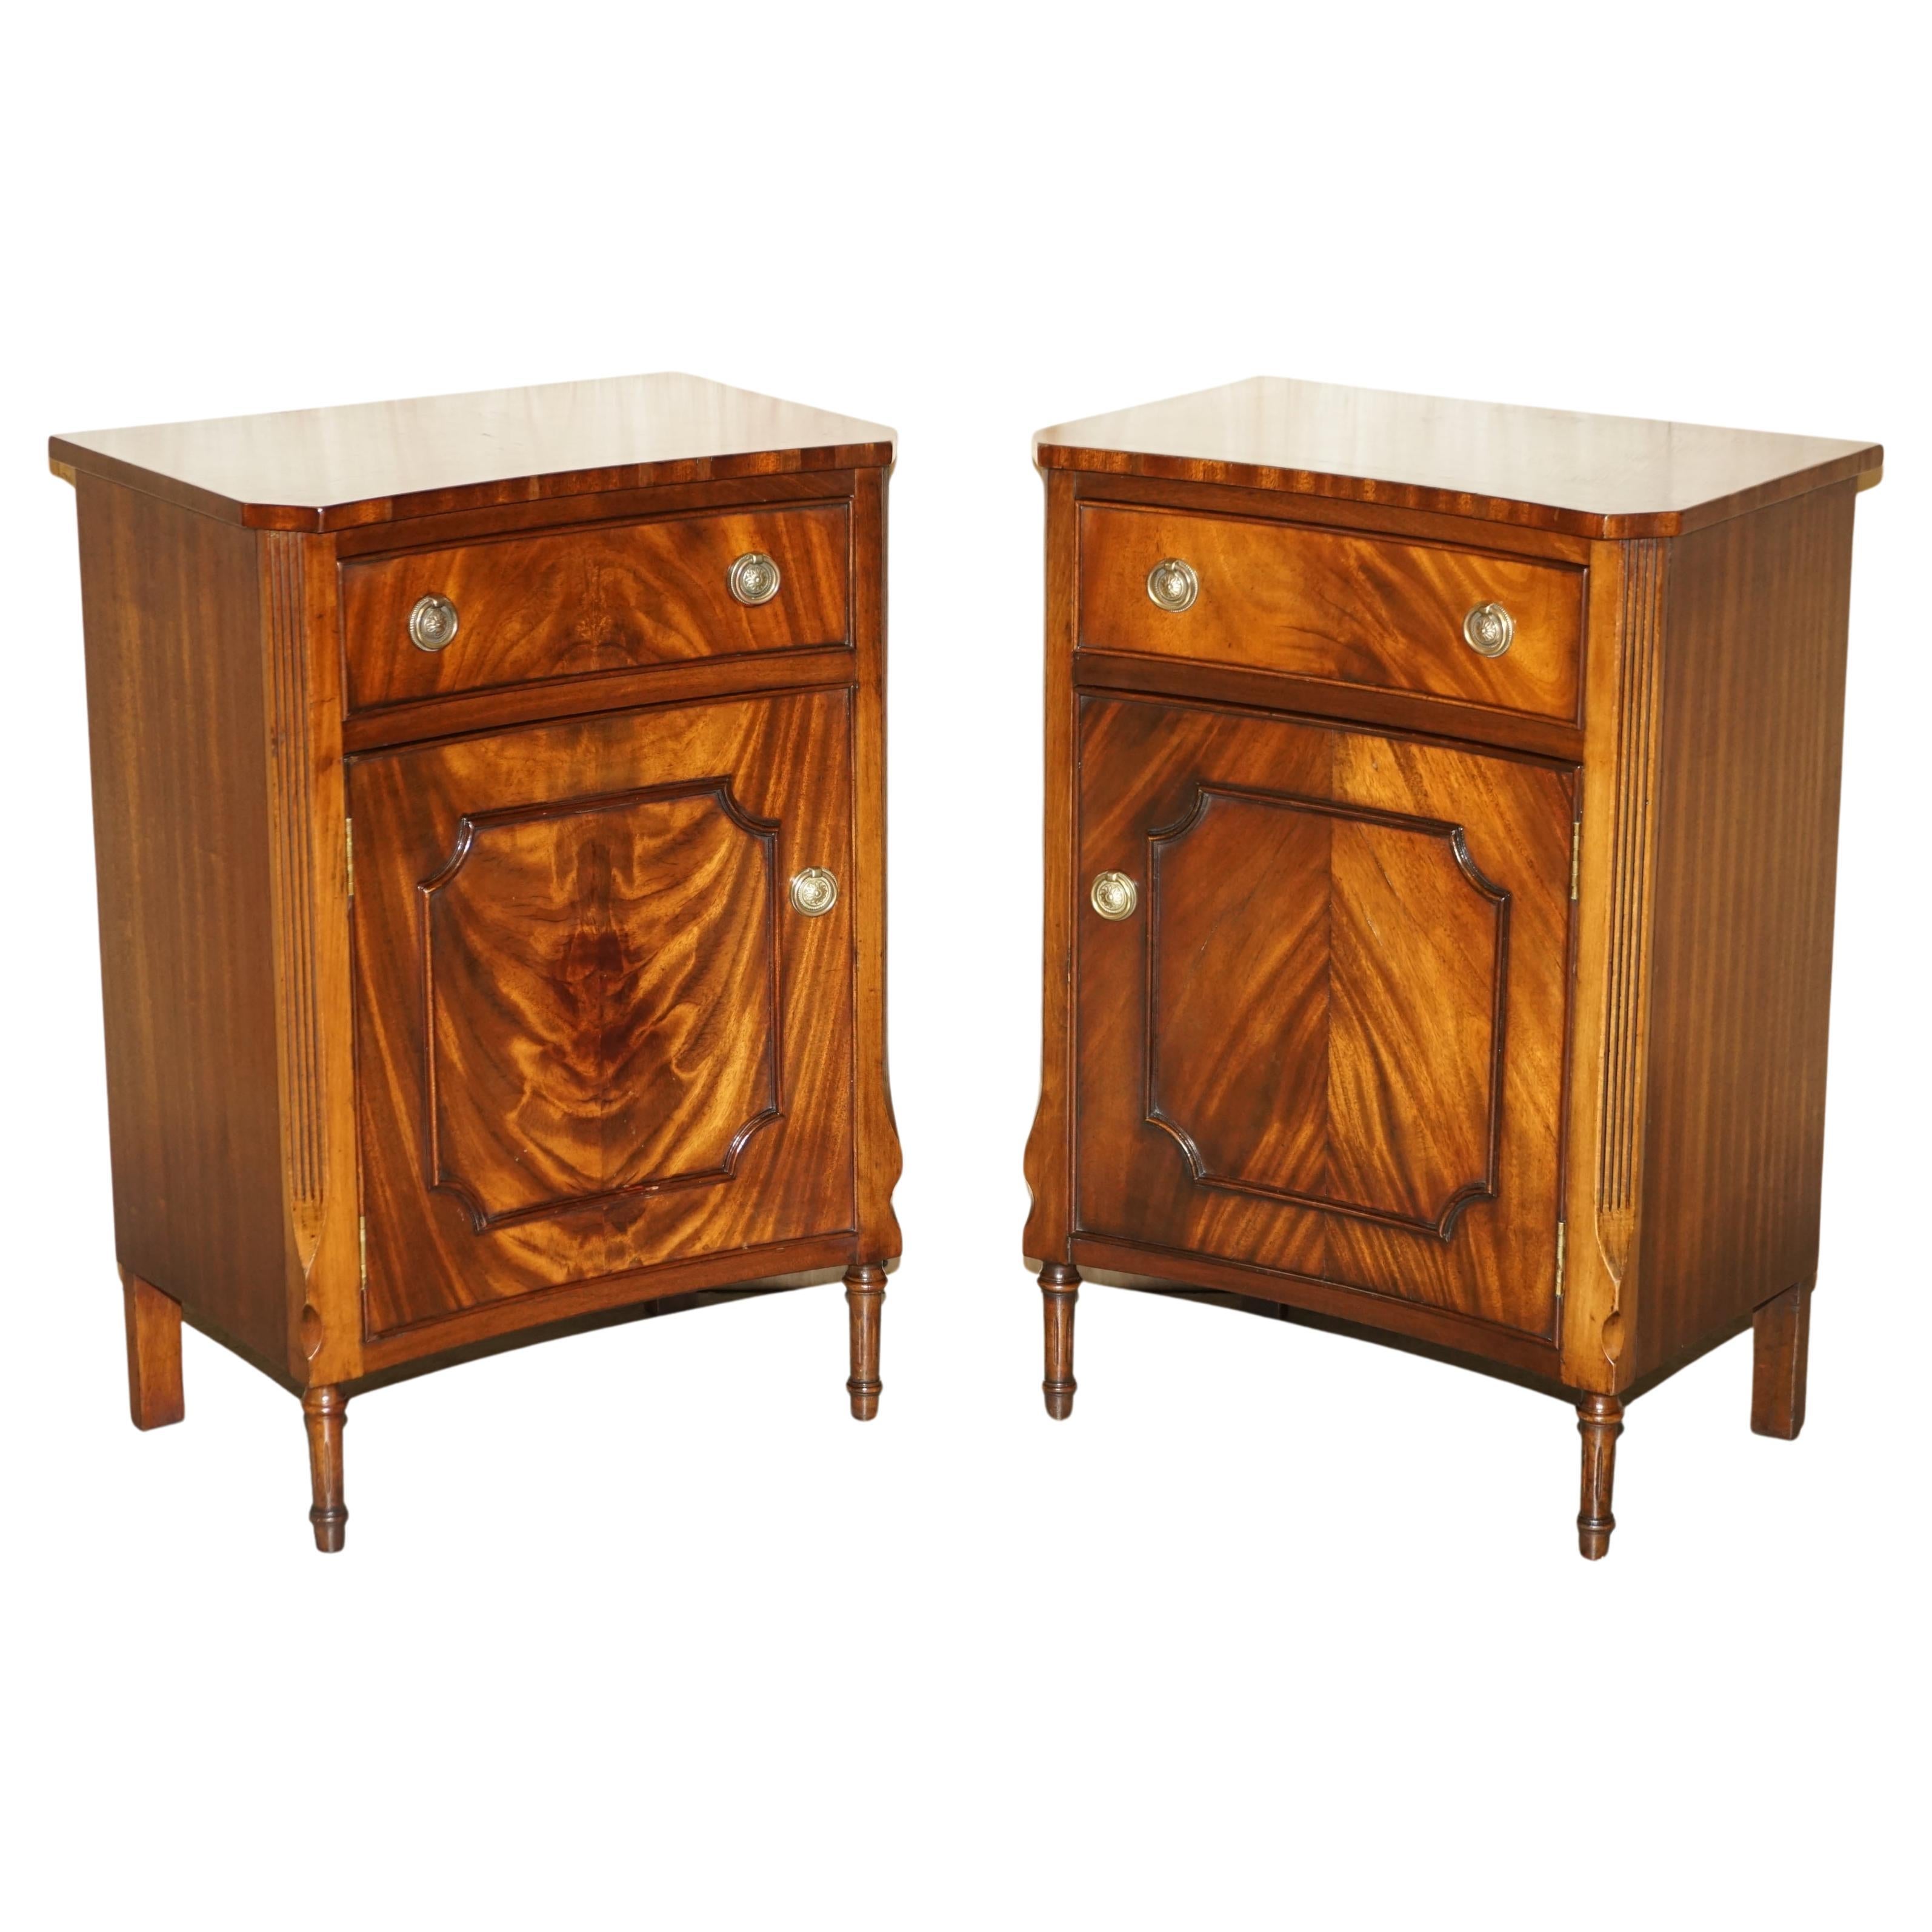 Stunning Pair of Vintage Bow Fronted Flamed Hardwood Side End Table Cupbards For Sale